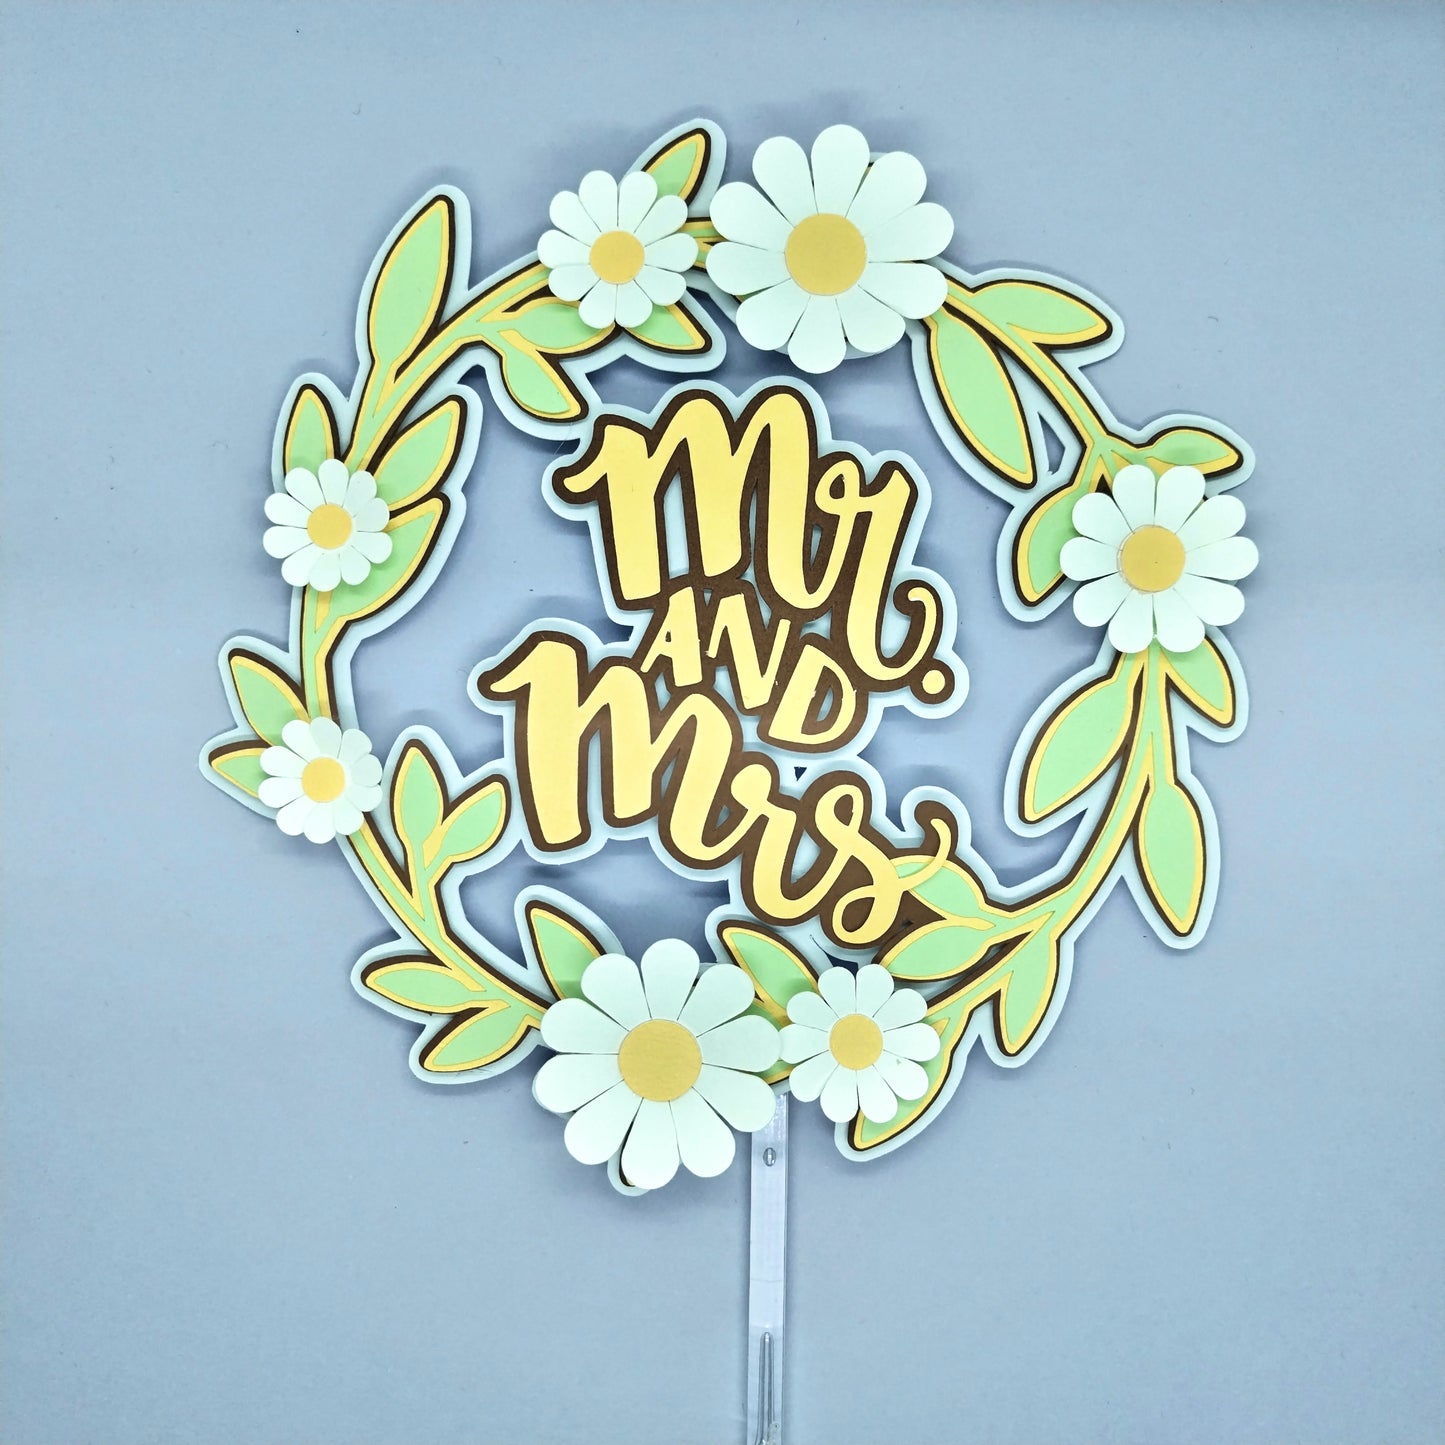 Cake Topper "Mr. And Mrs."